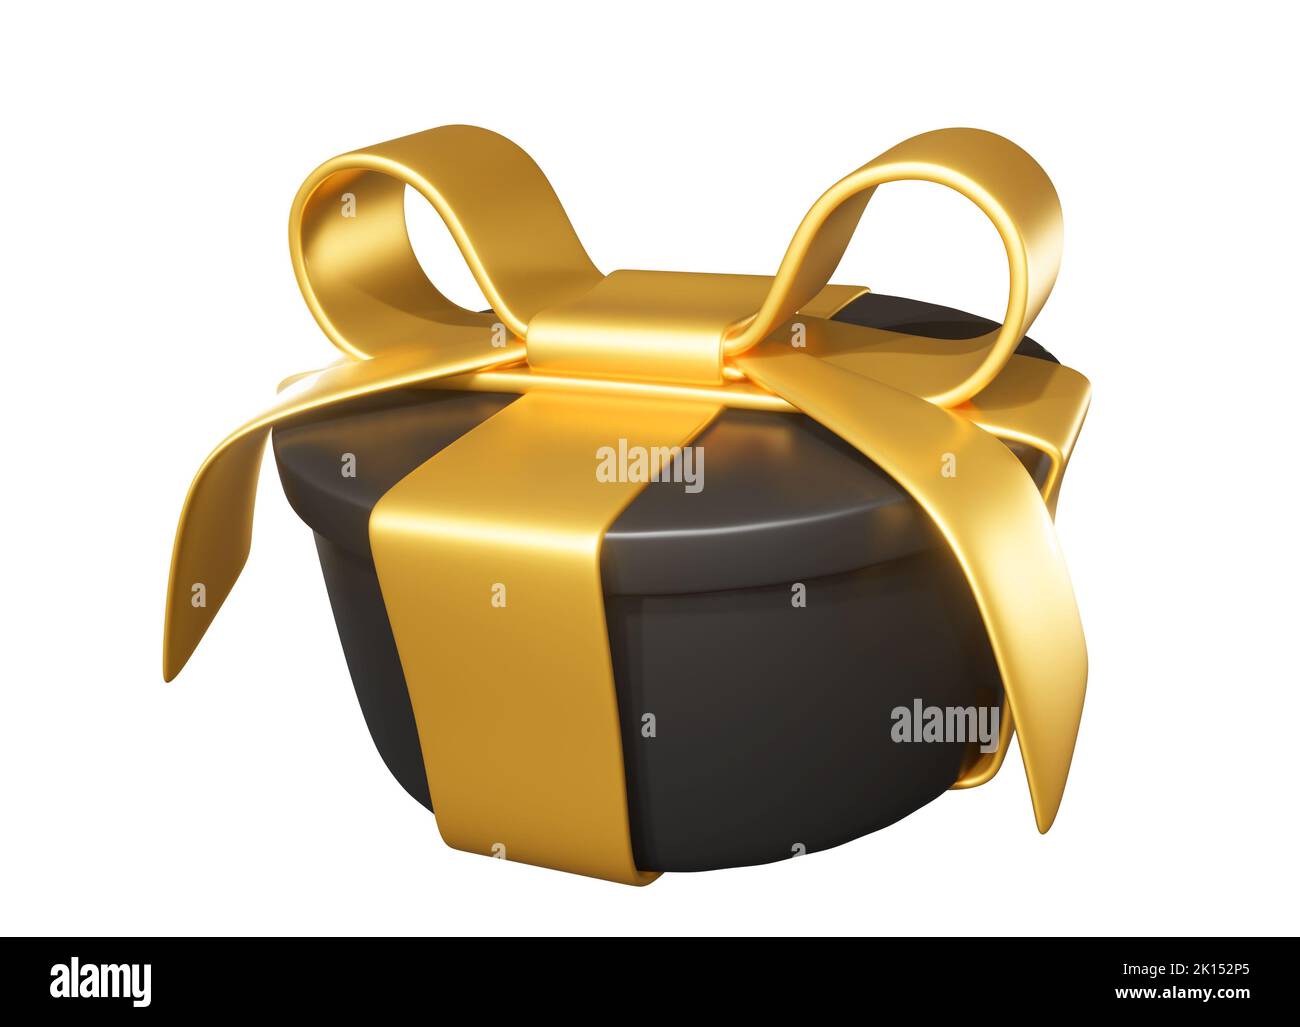 Realistic 3D Gift Black Box and Gold Bow on white. Stock Photo